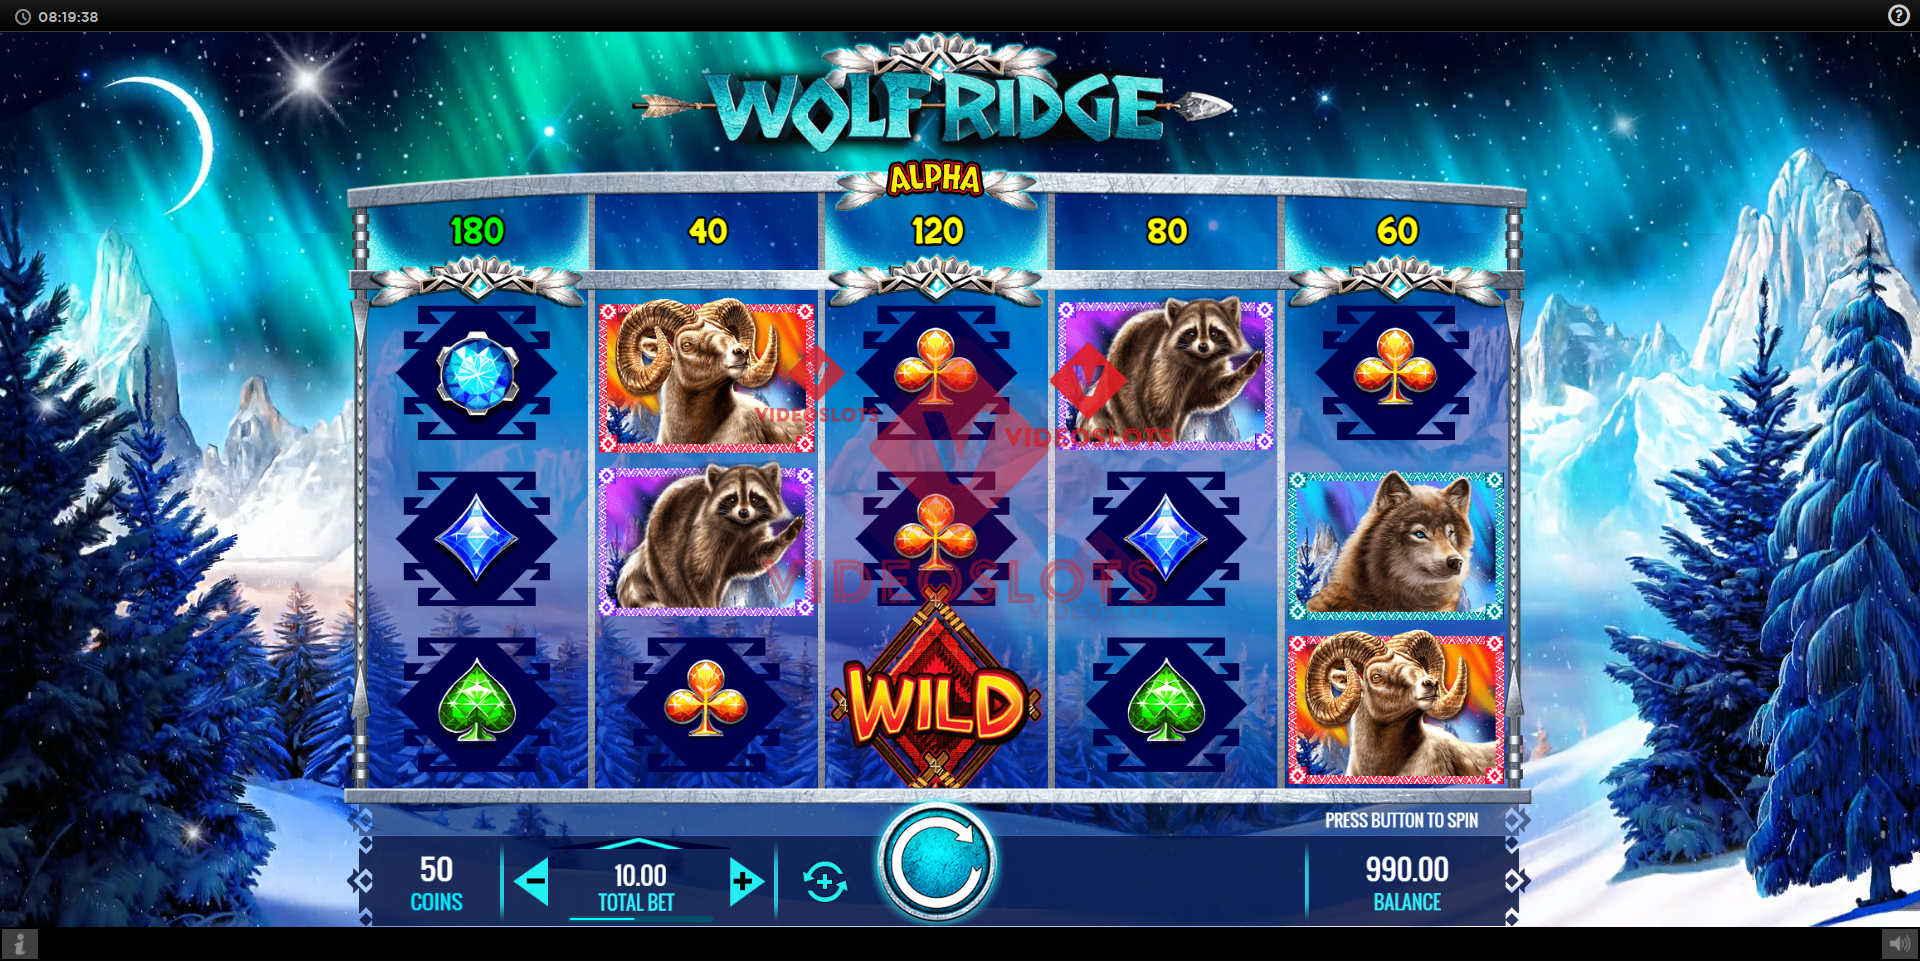 Base Game for Wolf Ridge slot from IGT